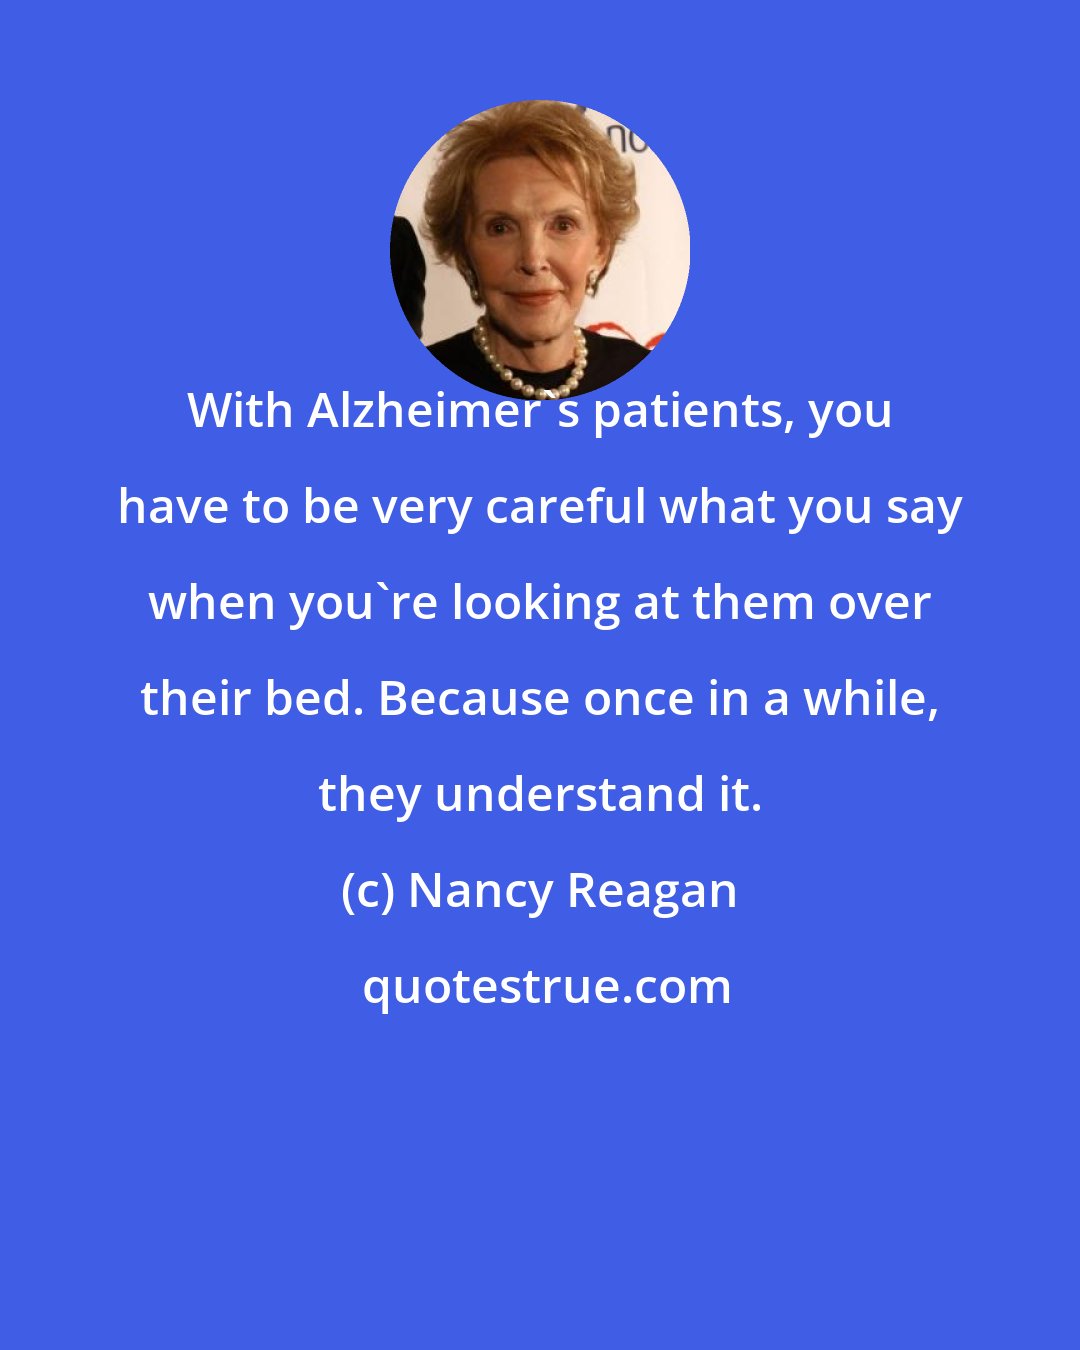 Nancy Reagan: With Alzheimer's patients, you have to be very careful what you say when you're looking at them over their bed. Because once in a while, they understand it.